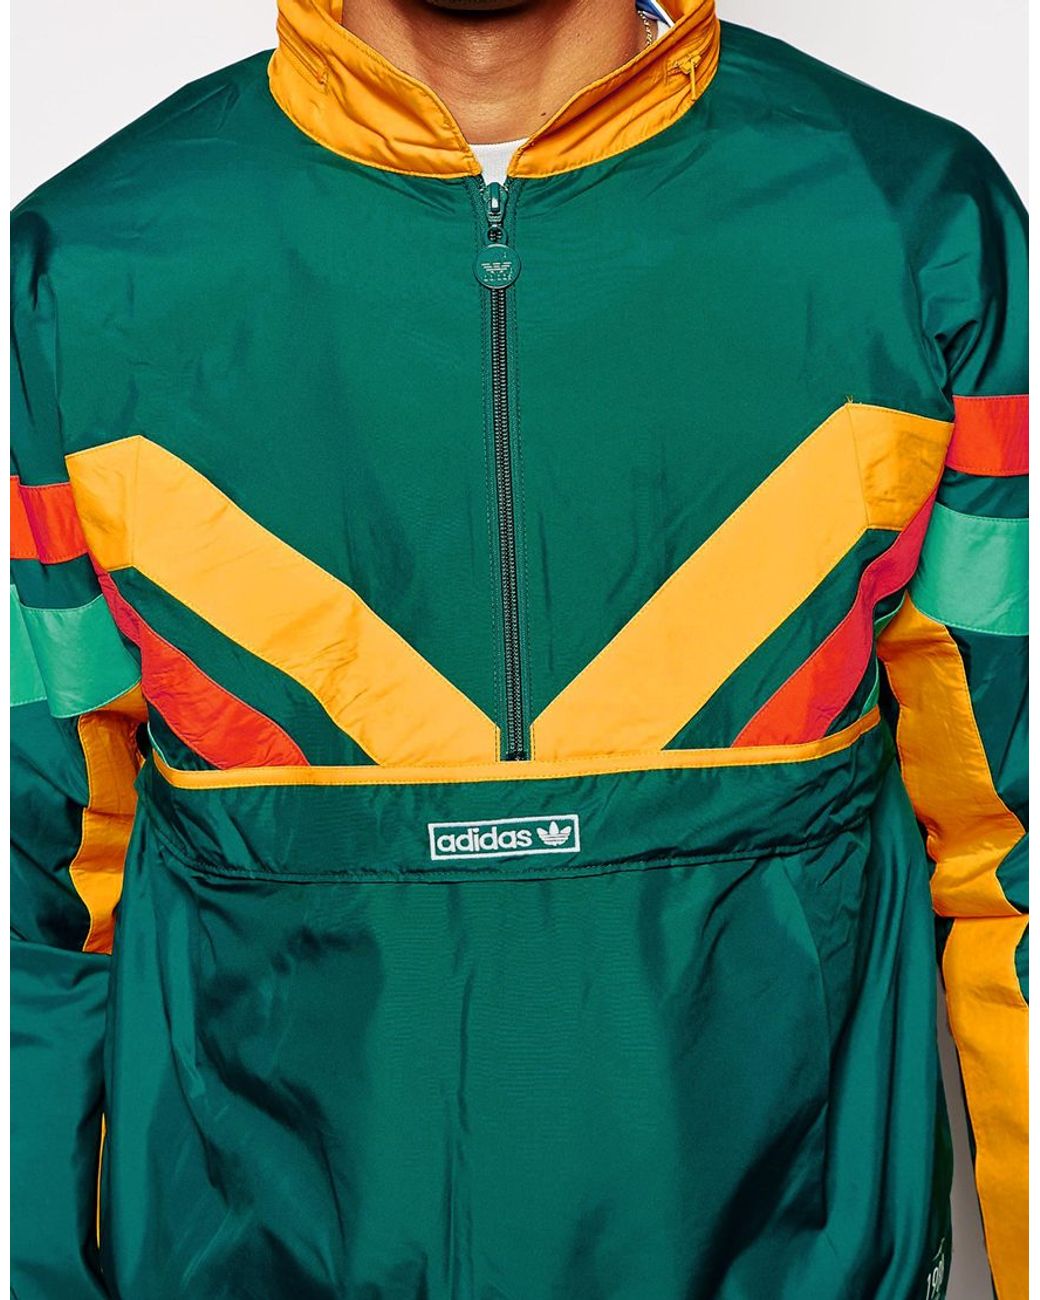 adidas Originals Archive 1988 Over The Head Jacket in Teal (Blue) for Men |  Lyst Canada